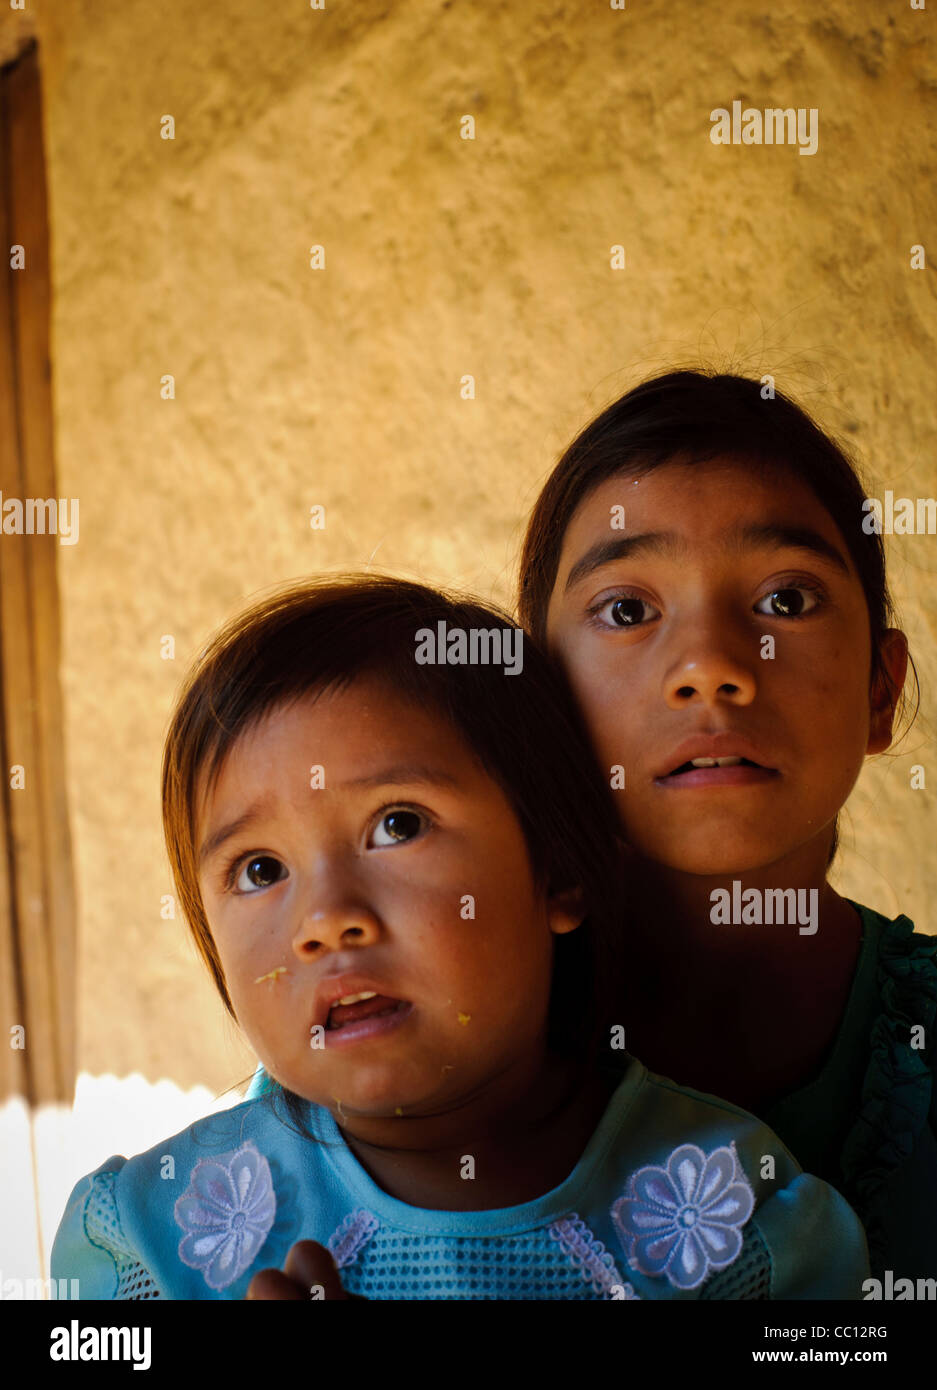 Two young girl children of a poor campesino in the mountains of Honduras. Older one carrying younger one Stock Photo